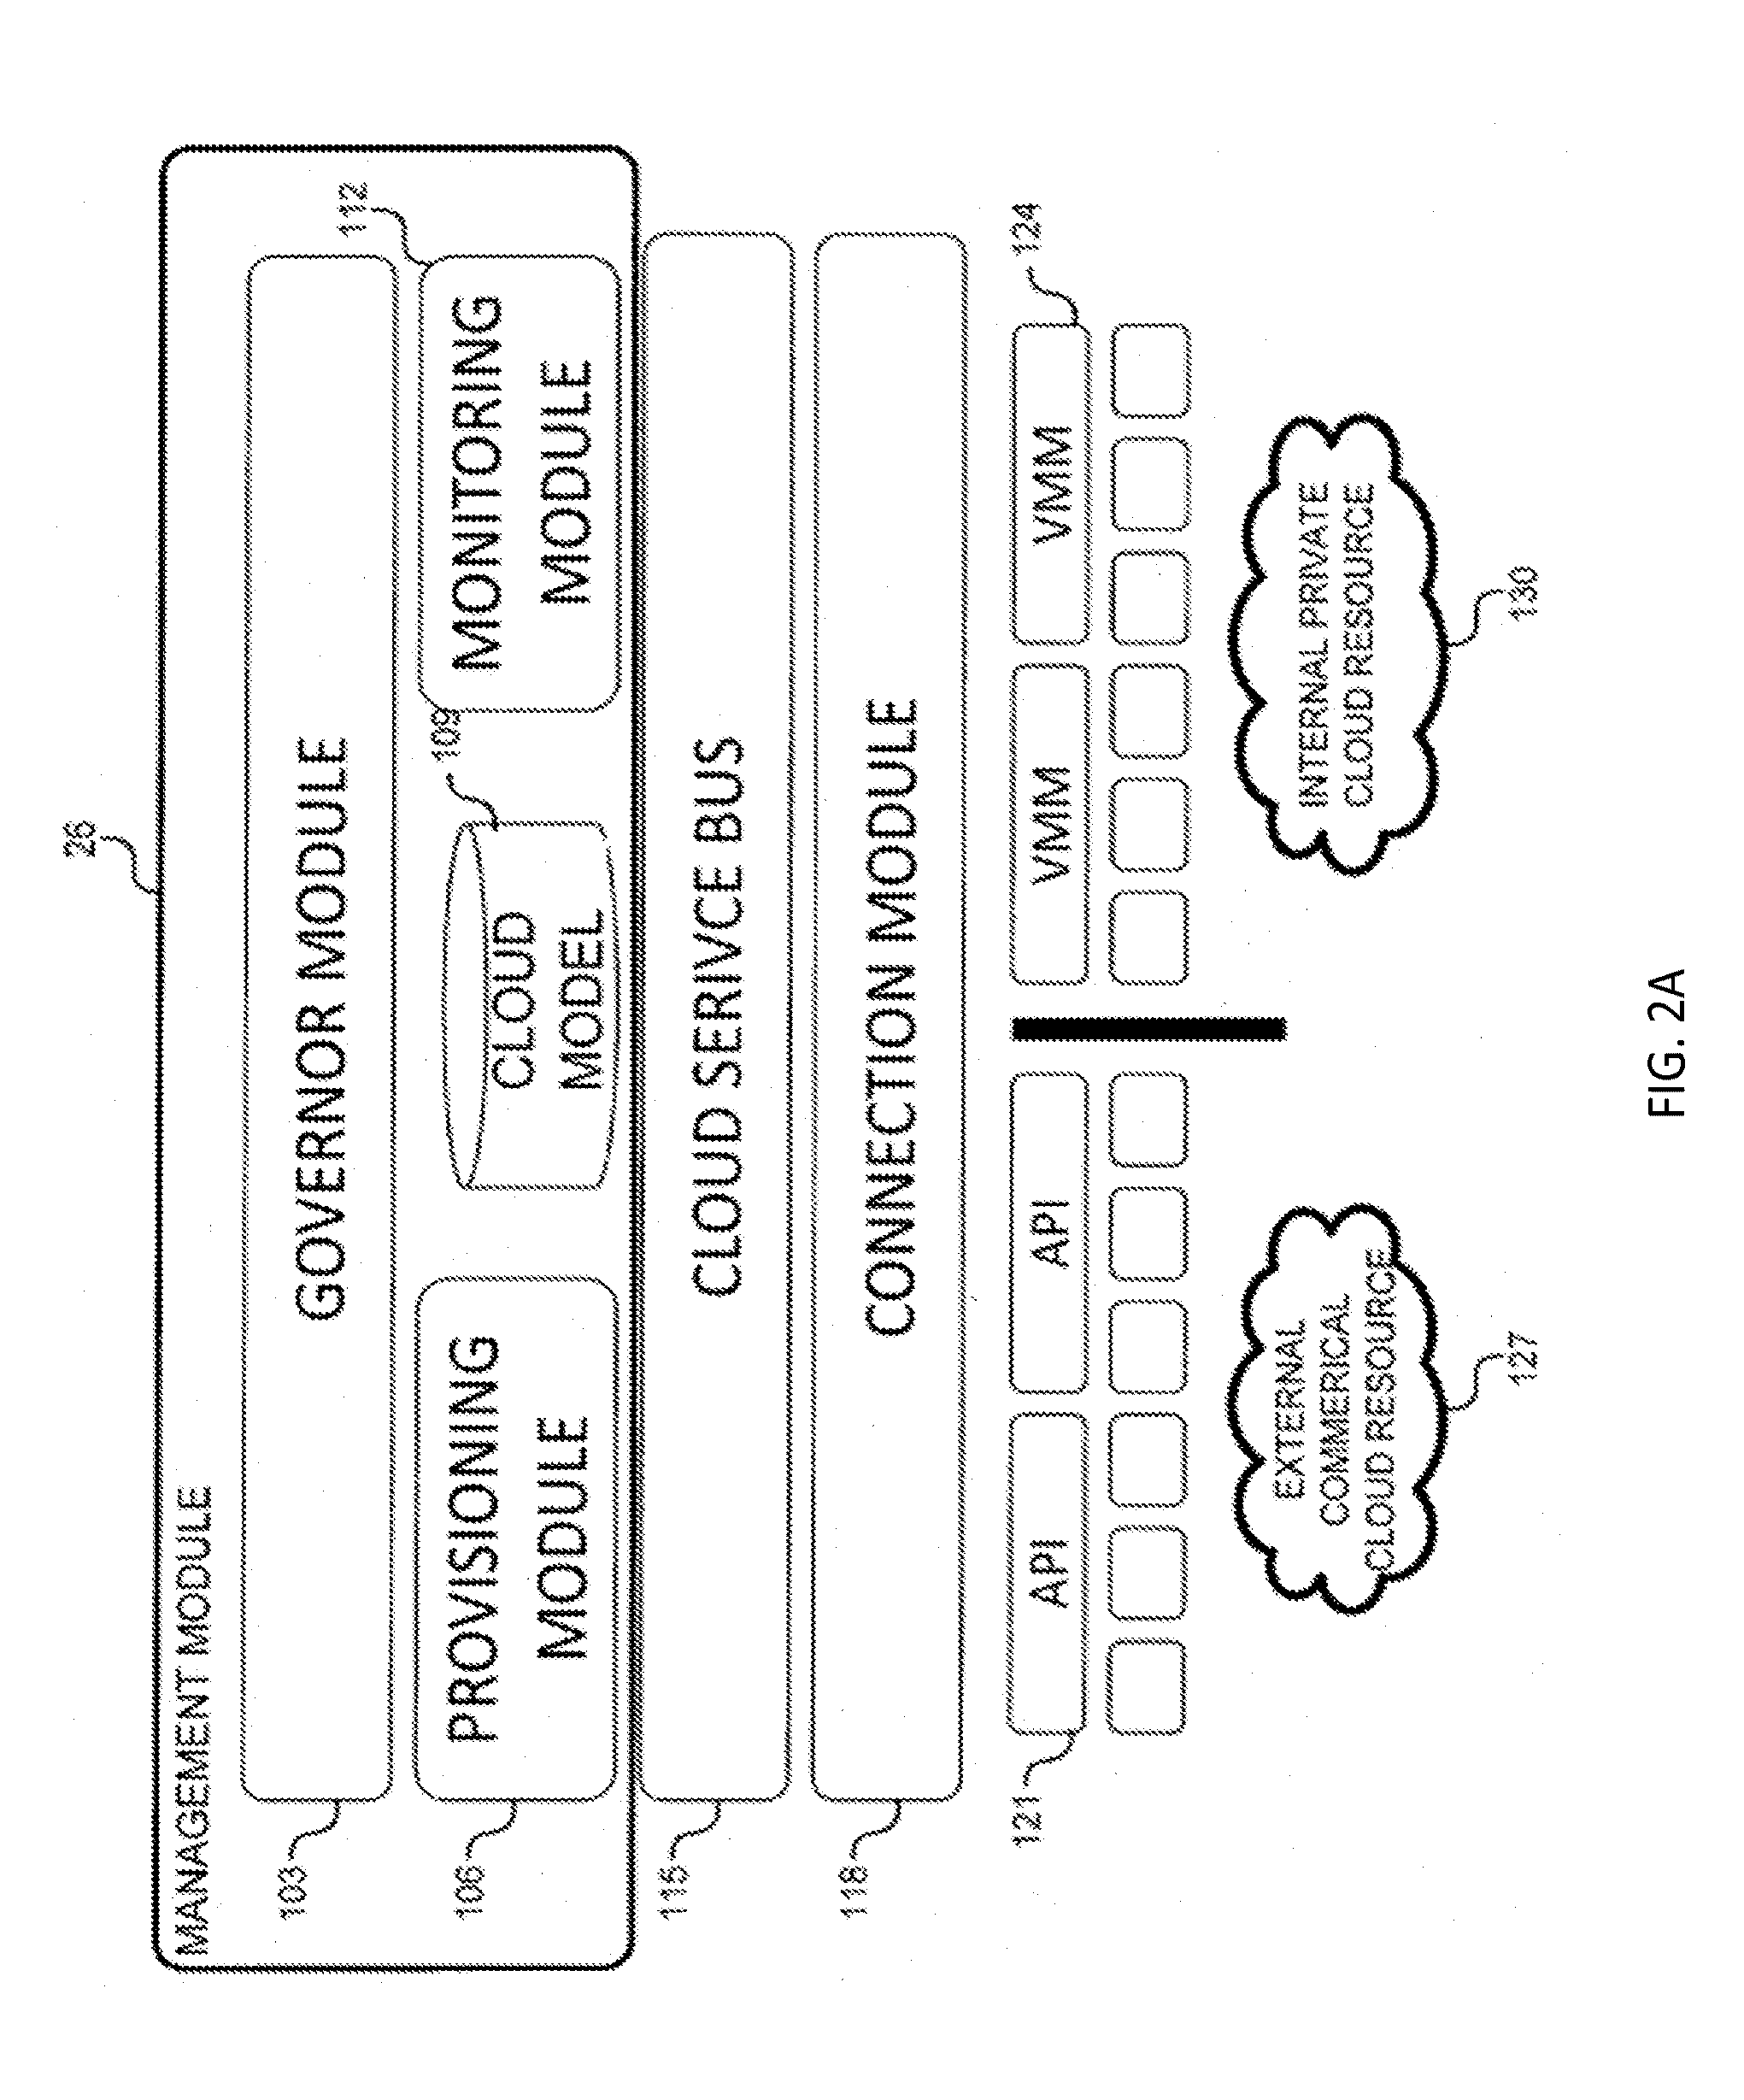 System and method for a cloud computing abstraction with multi-tier deployment policy